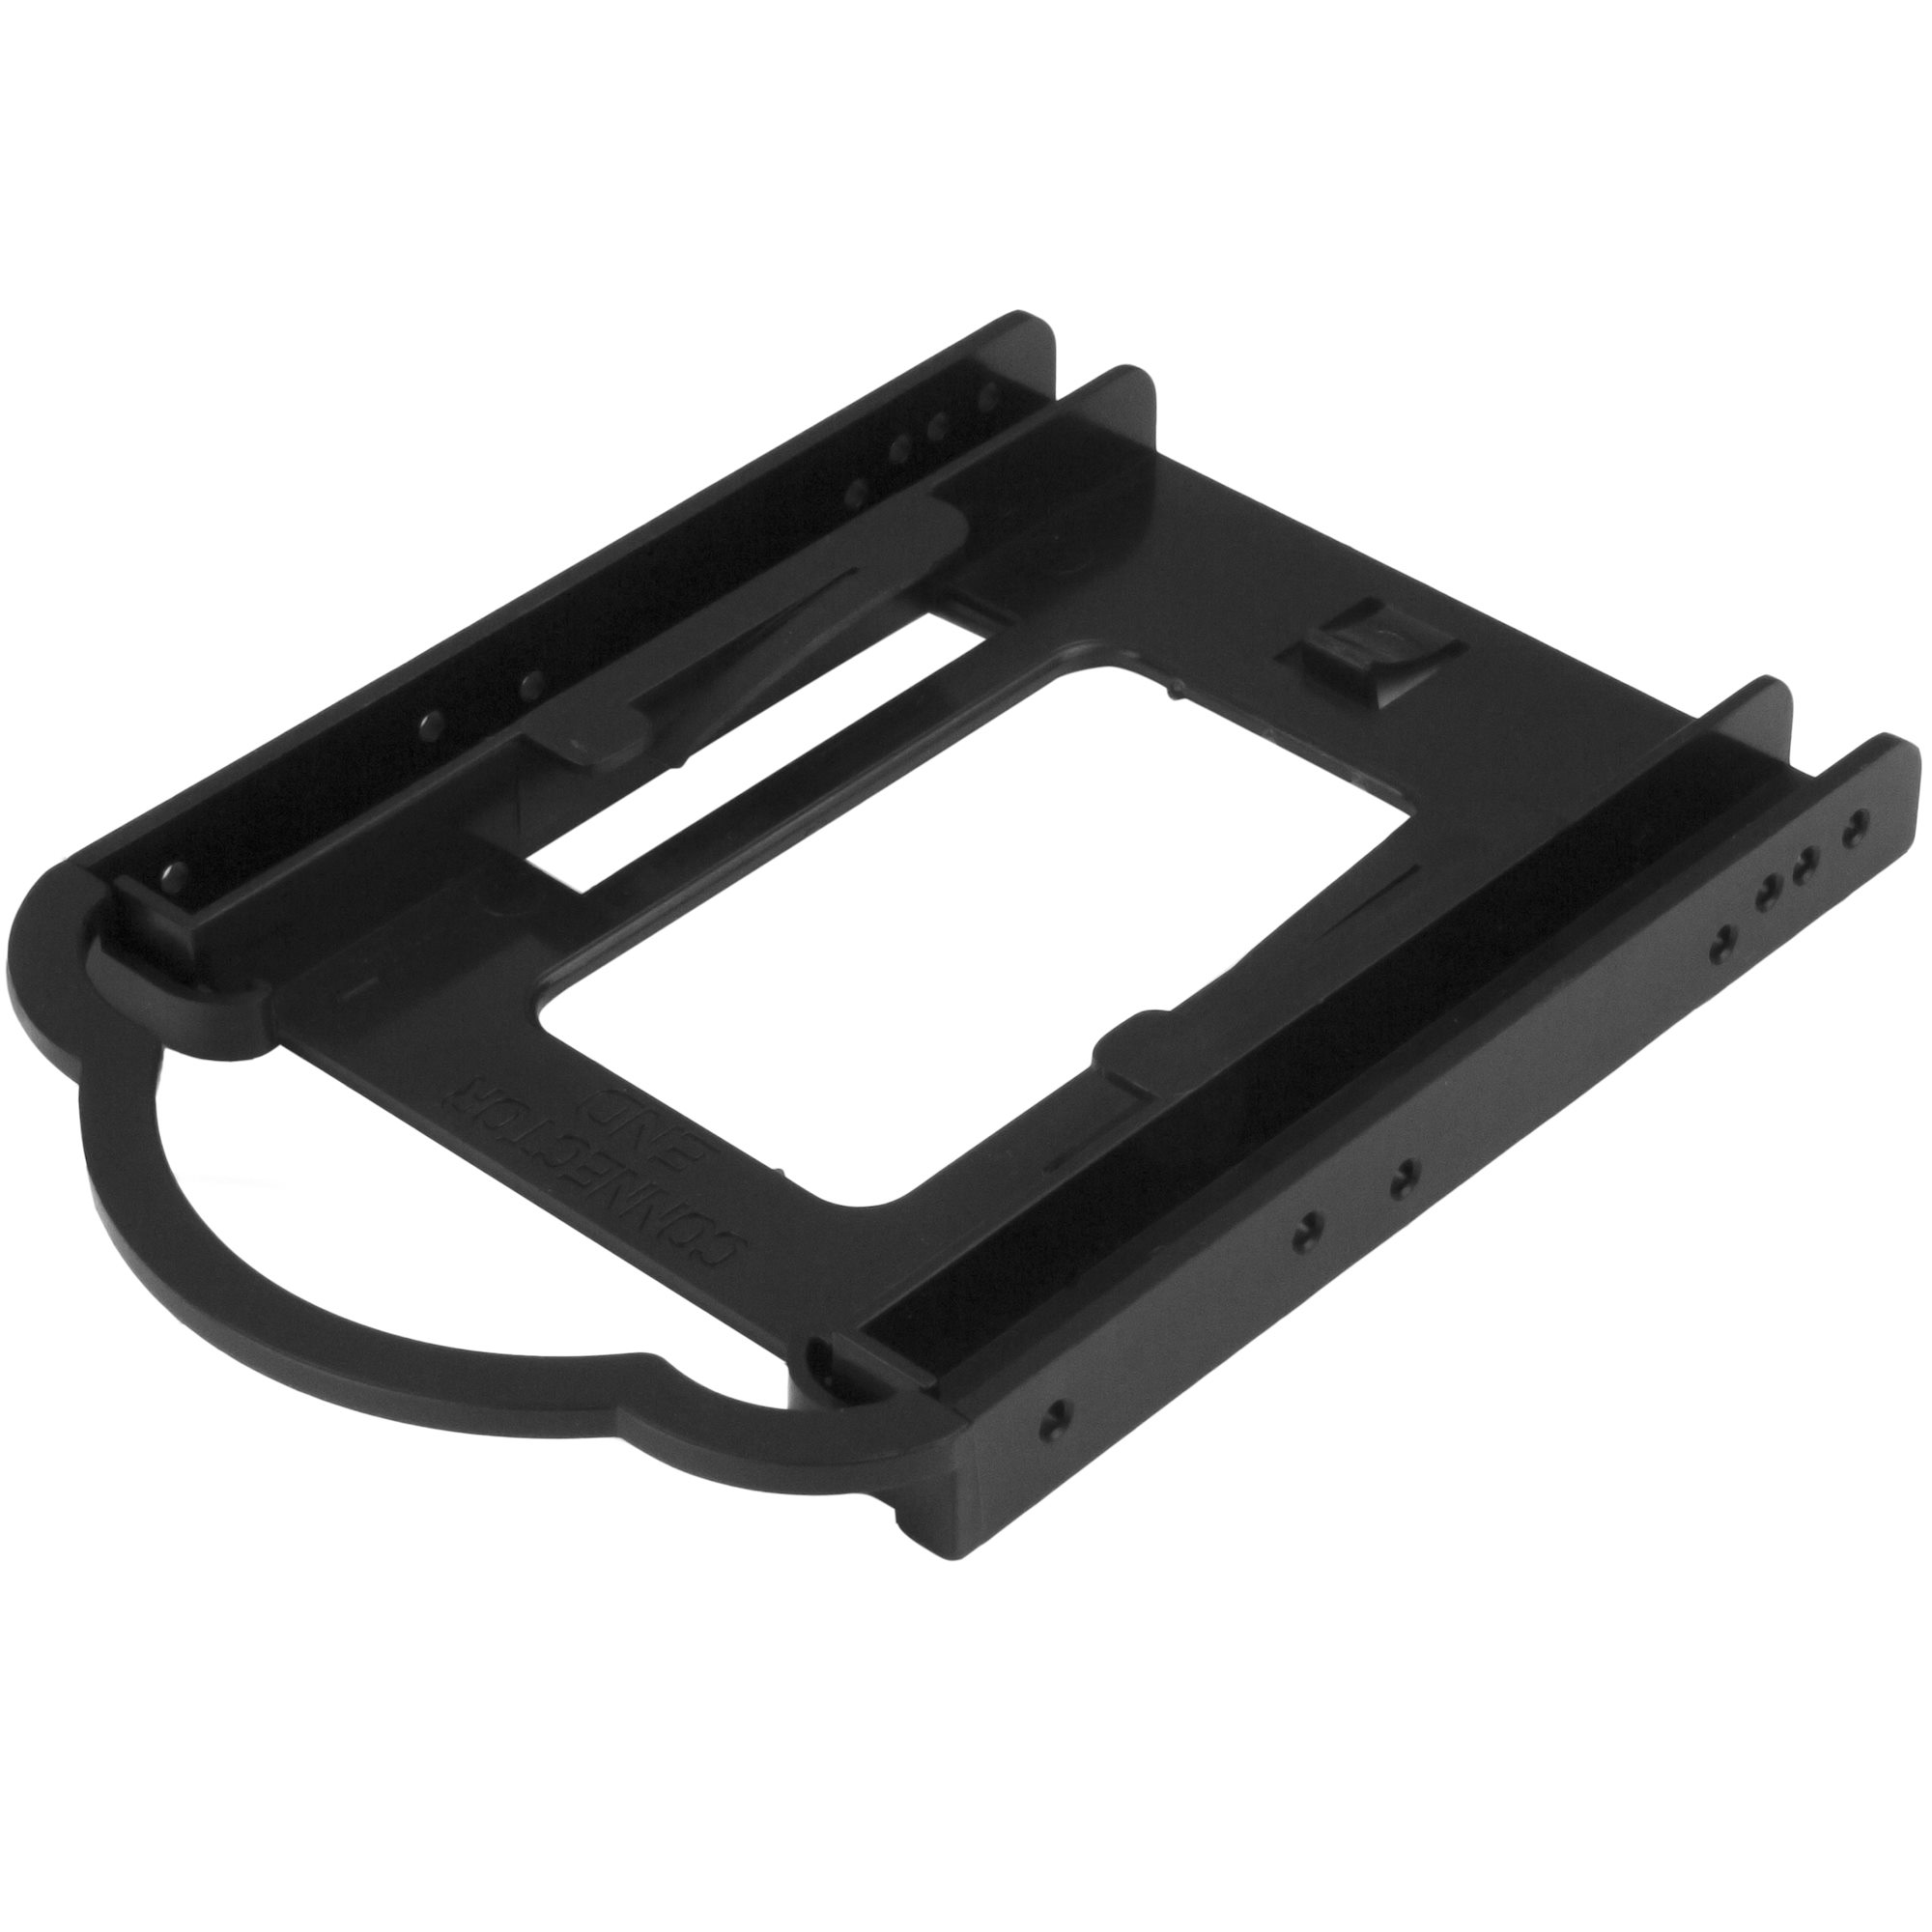 Plastic Dual 2.5" To 3.5" SSD HDD Mount Hard Drive-Bracket Storage Holder For PC 